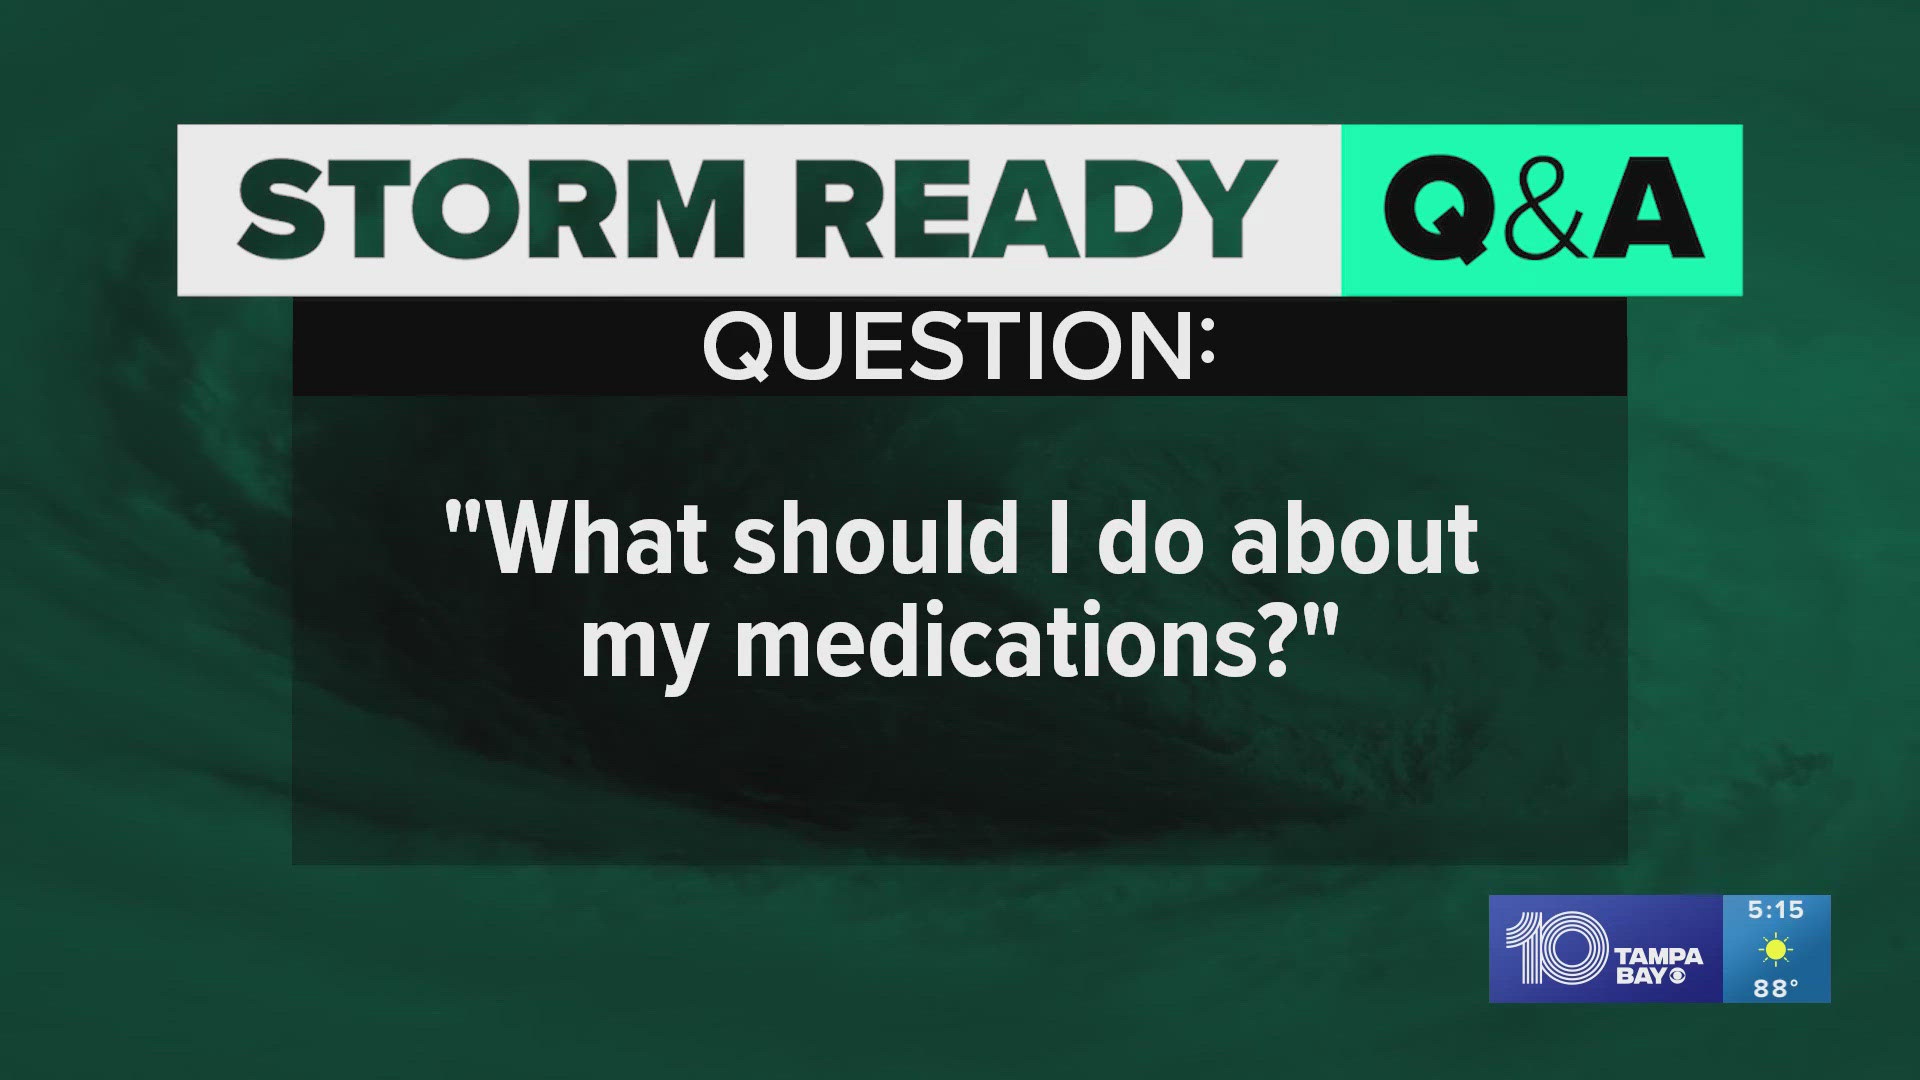 Pharmacies will most likely be closed after a hurricane, so you need to make sure you have at least a 30-day supply of any prescription medication you use.